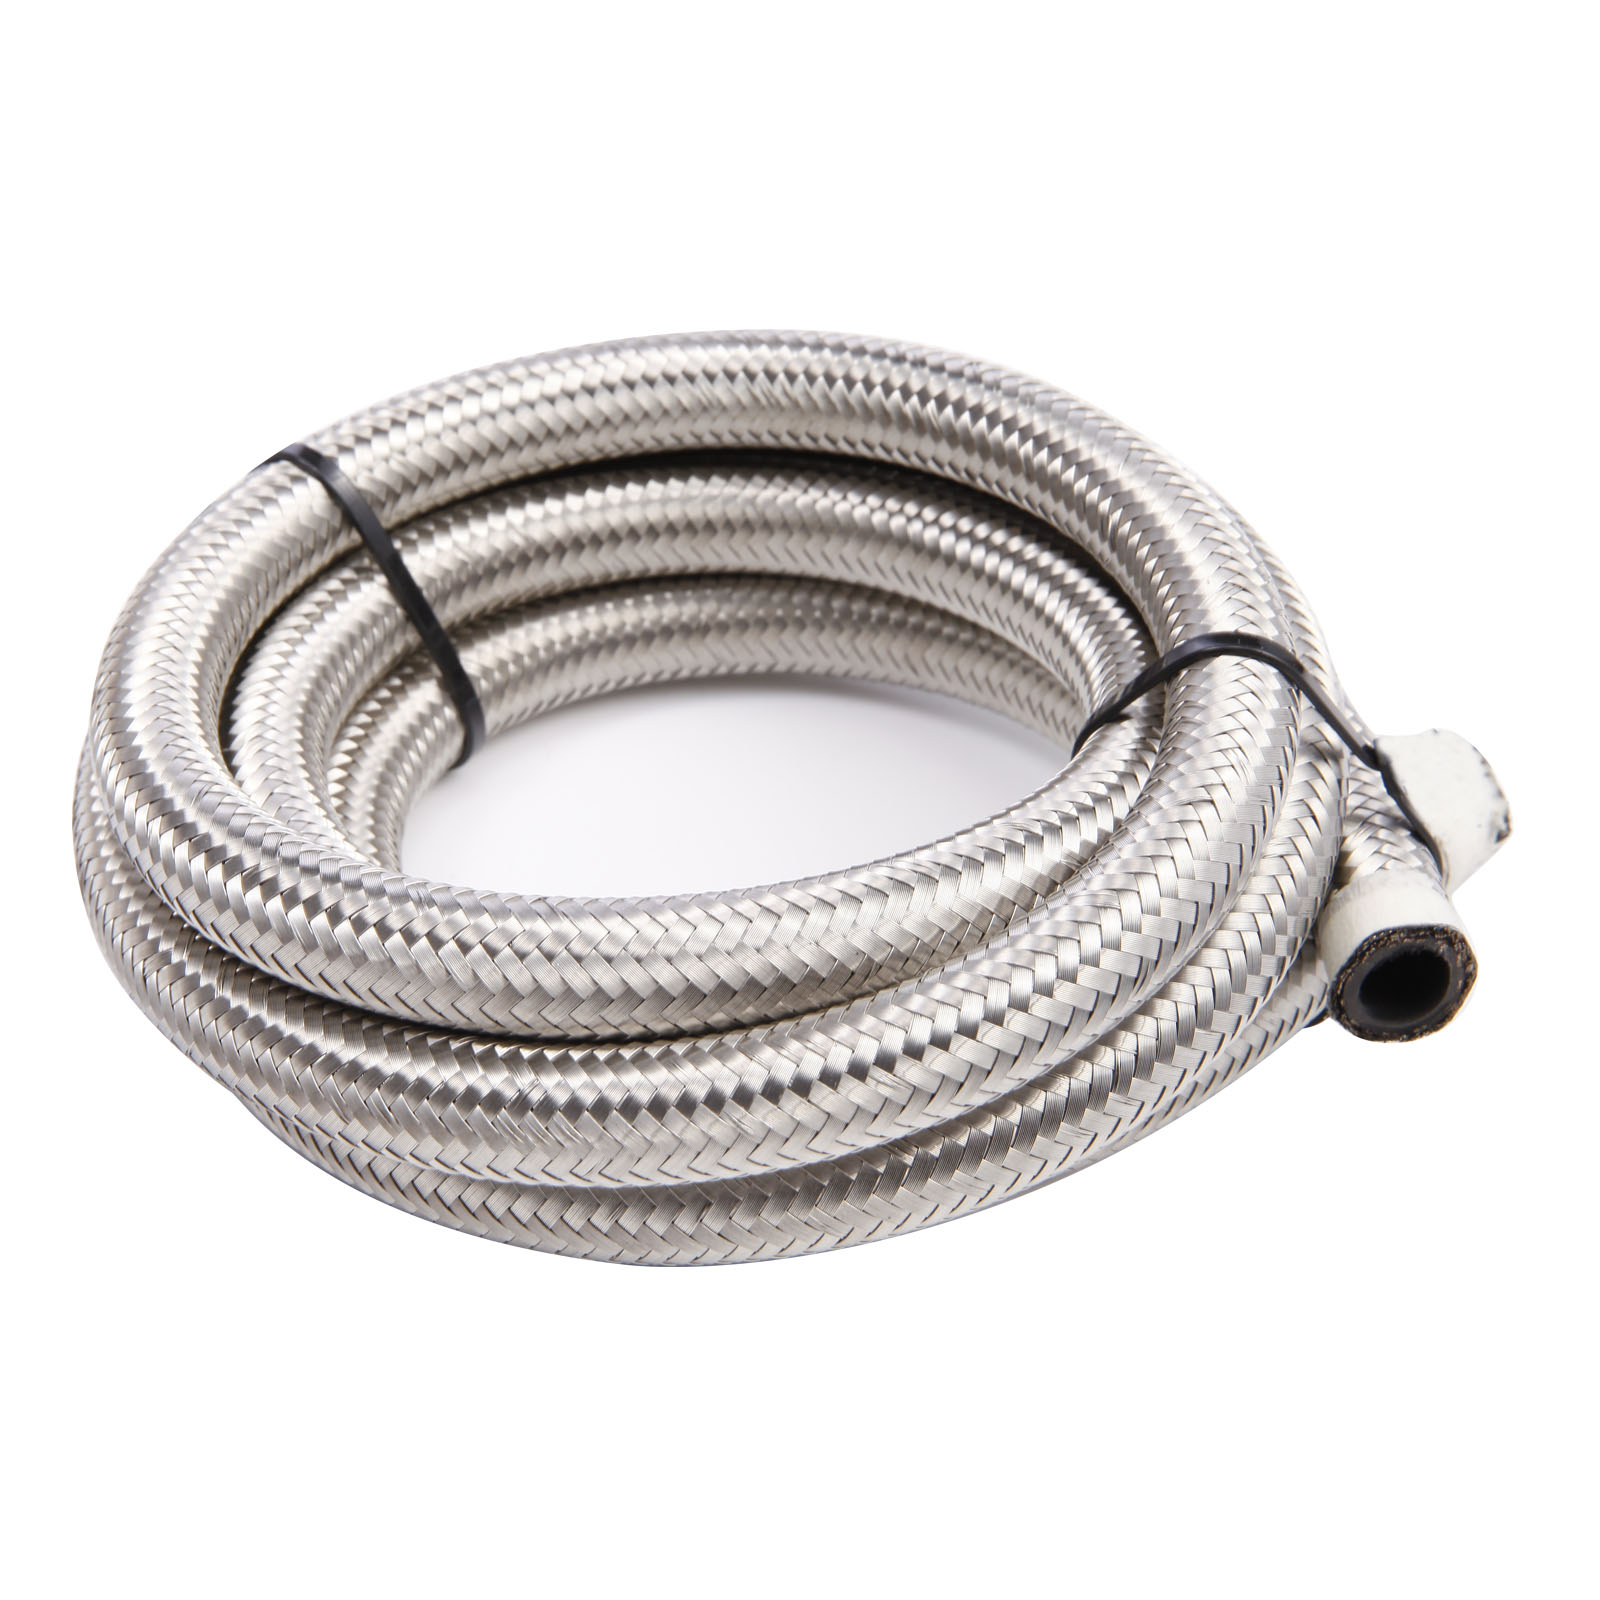 4AN AN4 4-AN OIL FUEL LINE HOSE 2M Meter 1//4/" STAINLESS STEEL  BRAIDED